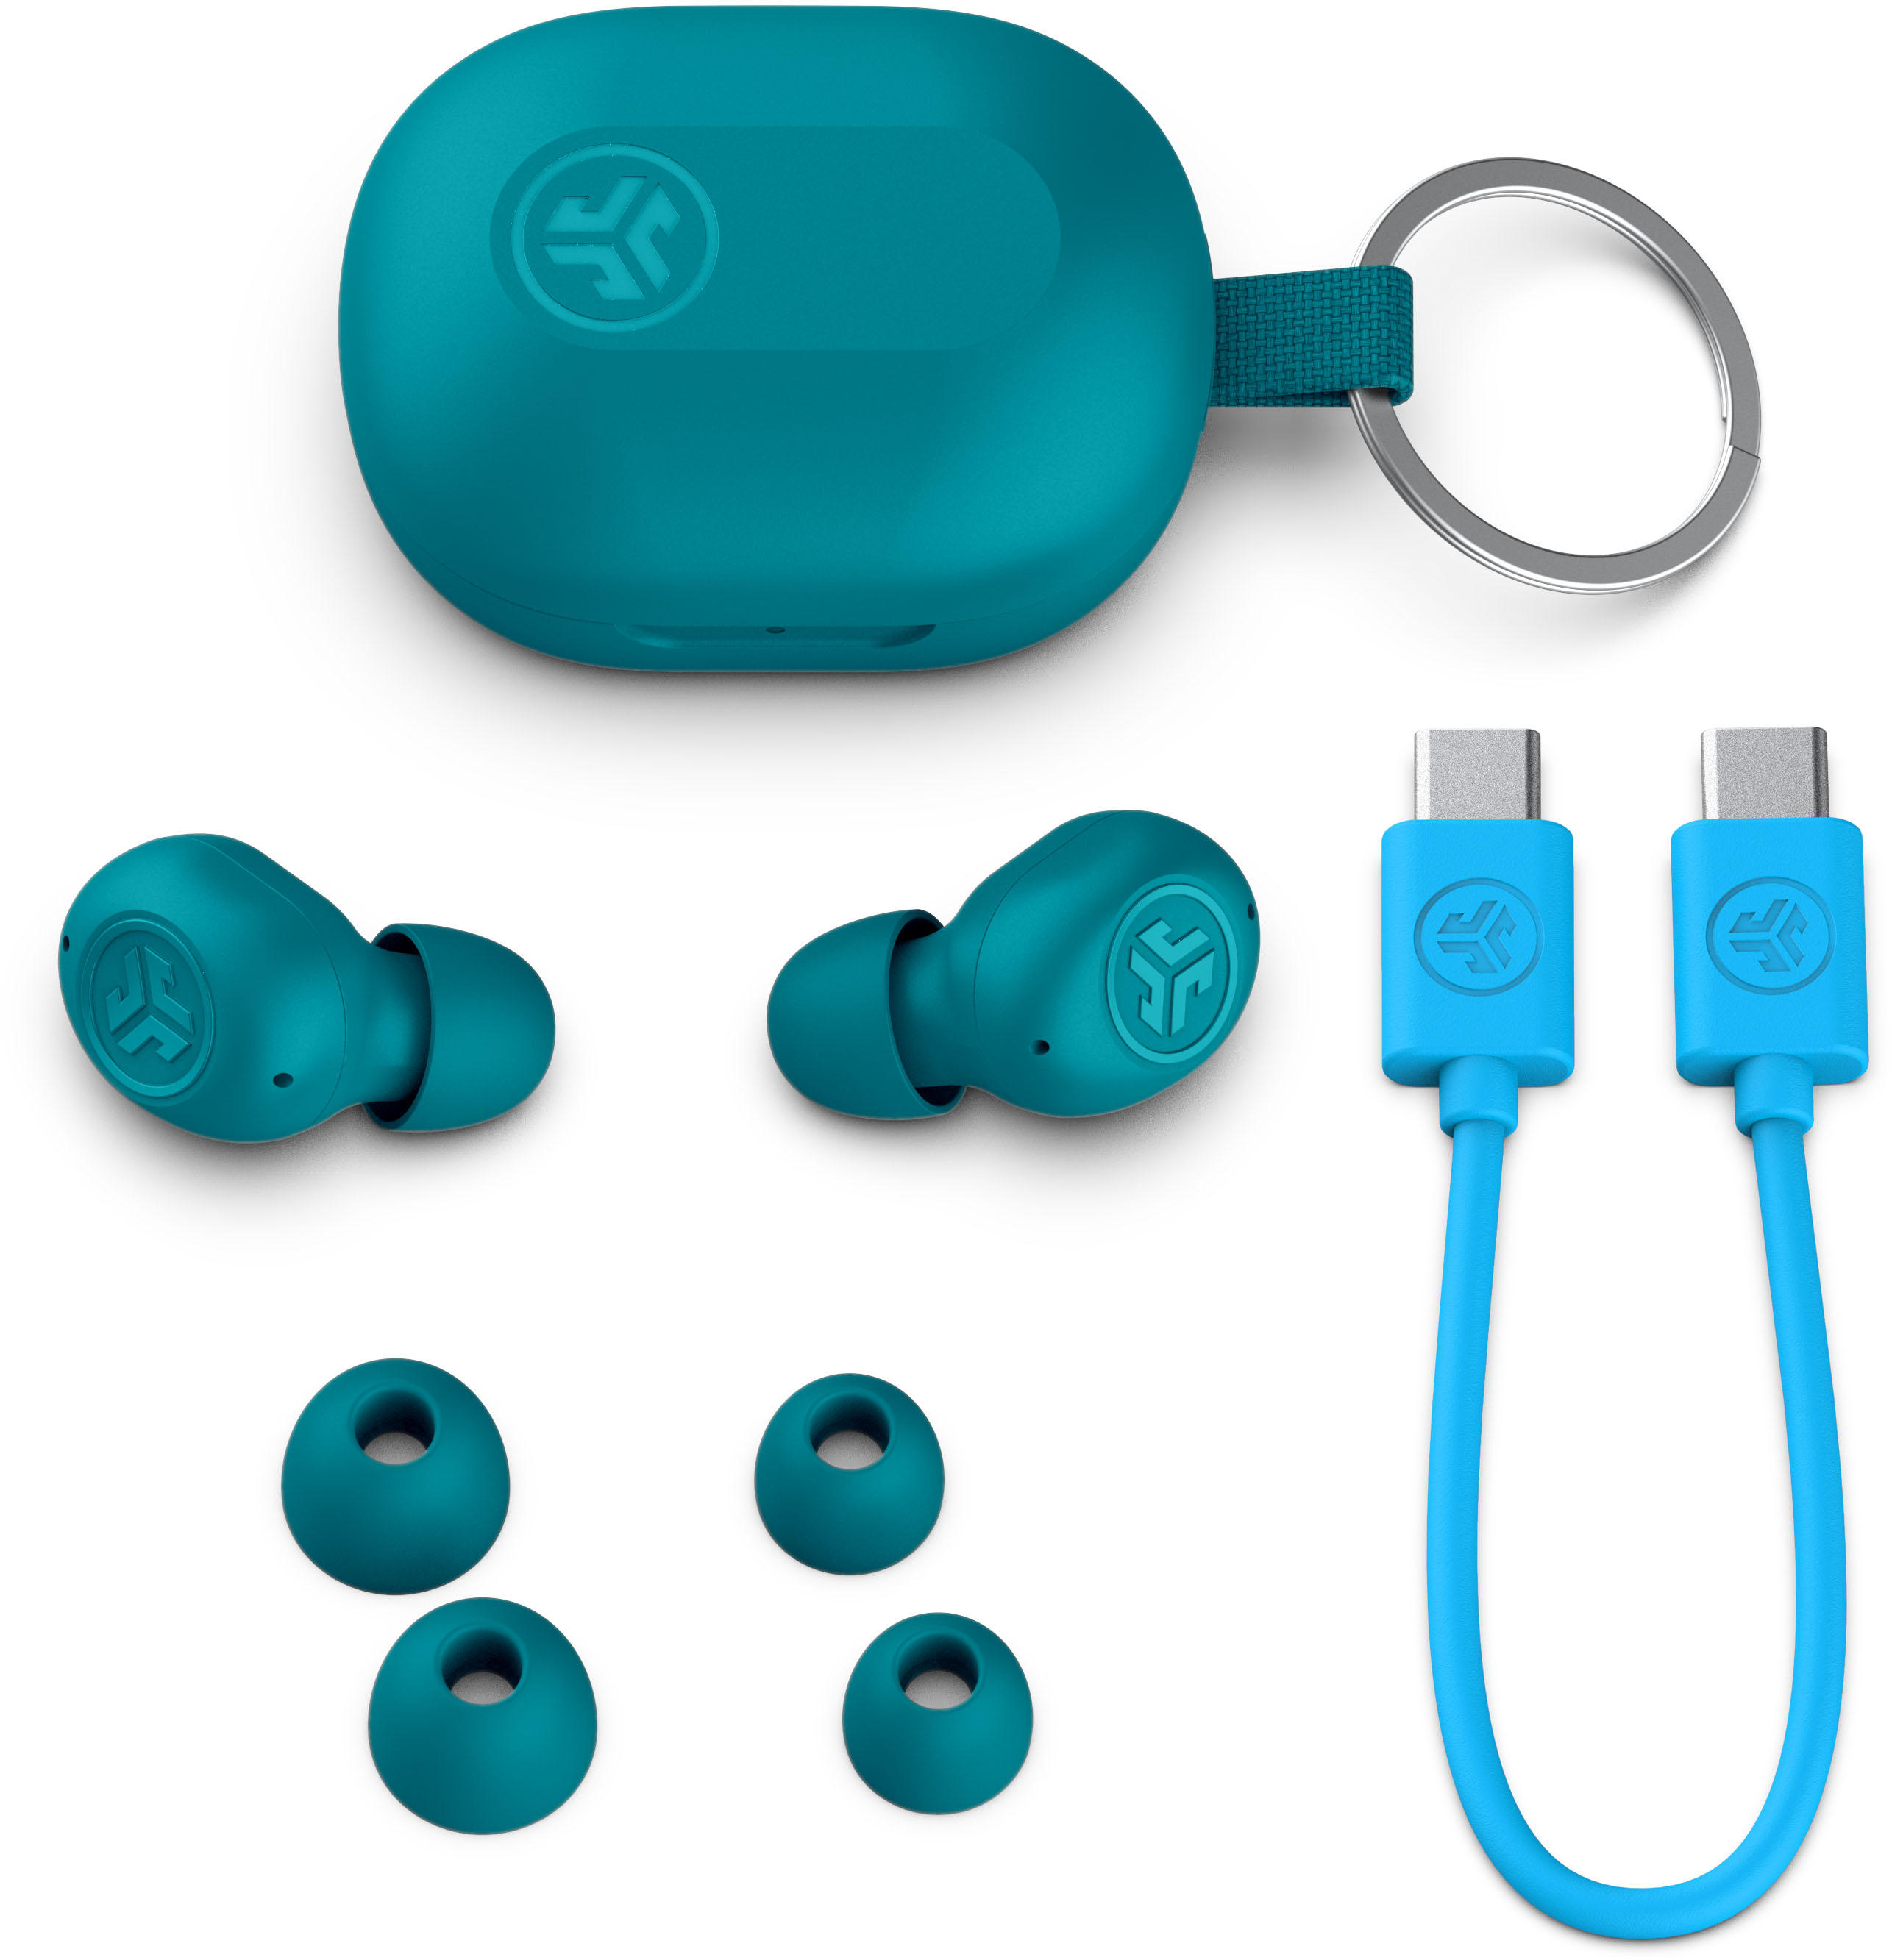  EARBUDi Flex - Compatible with Your Apple iPhone Wired EarPods, Attaches to The Wired EarPods That are Made by Apple